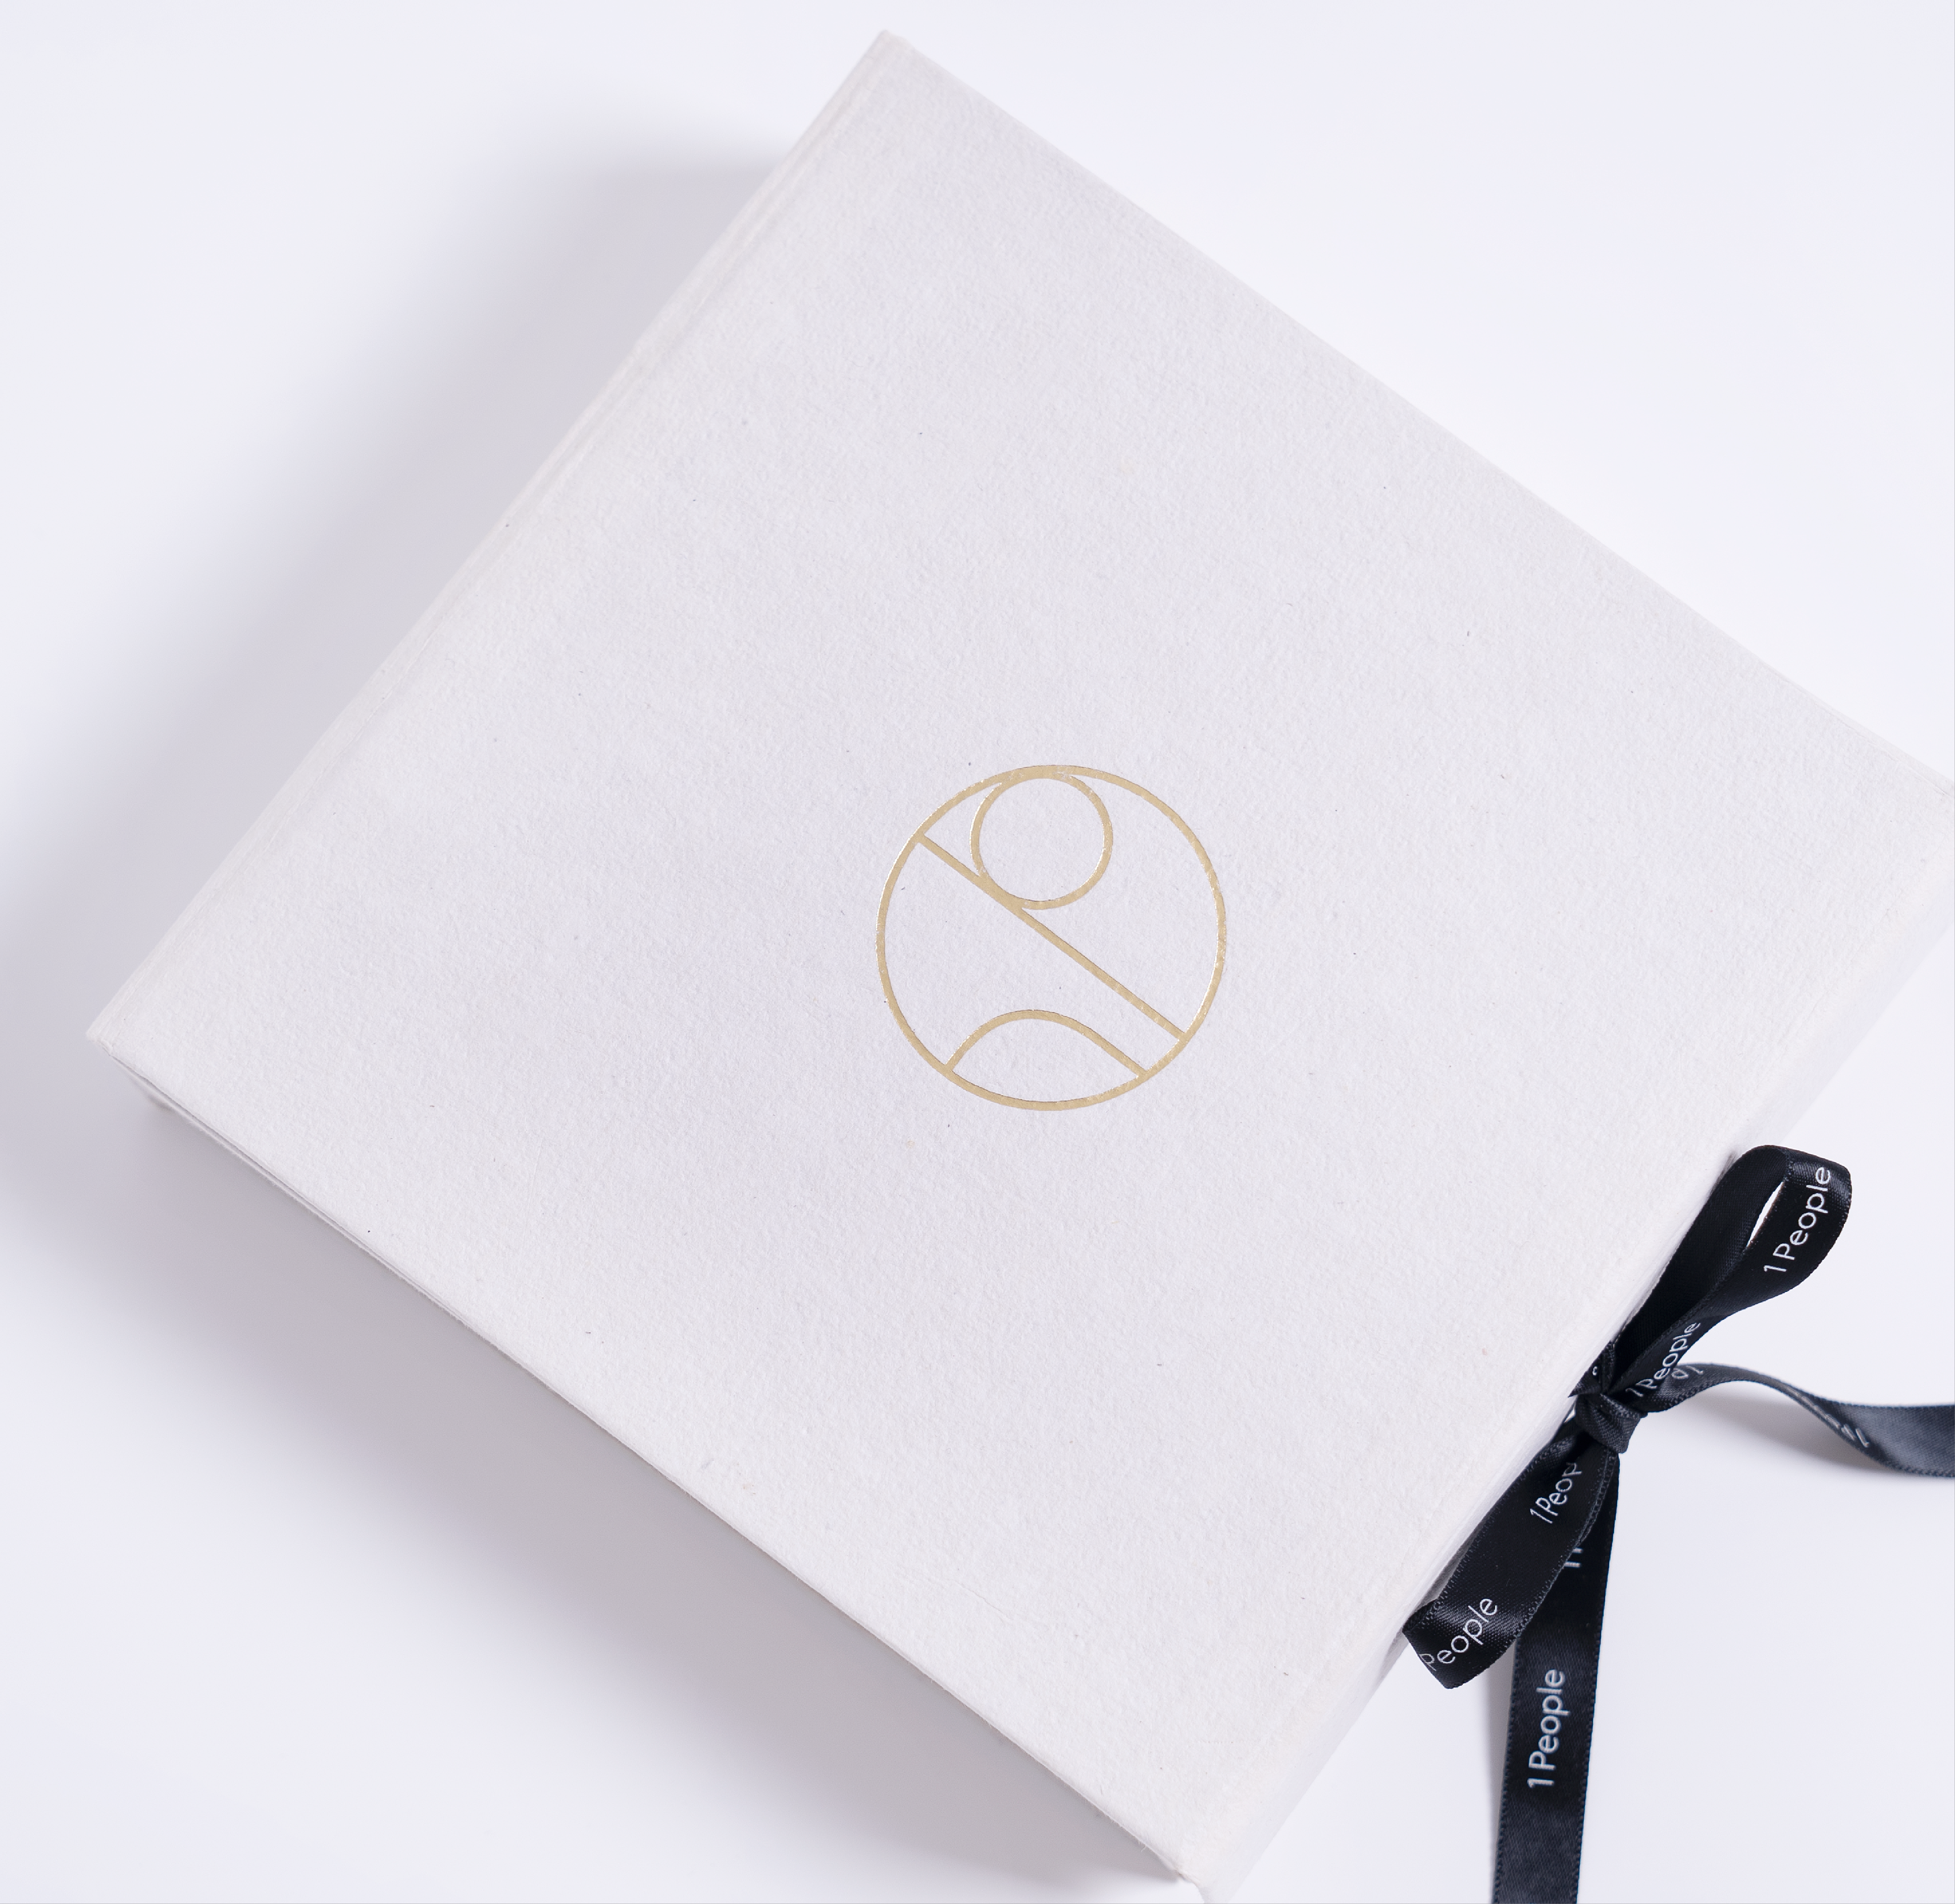 packaging, box, zero waste, recycled paper, sustainable fashion, slow fashion